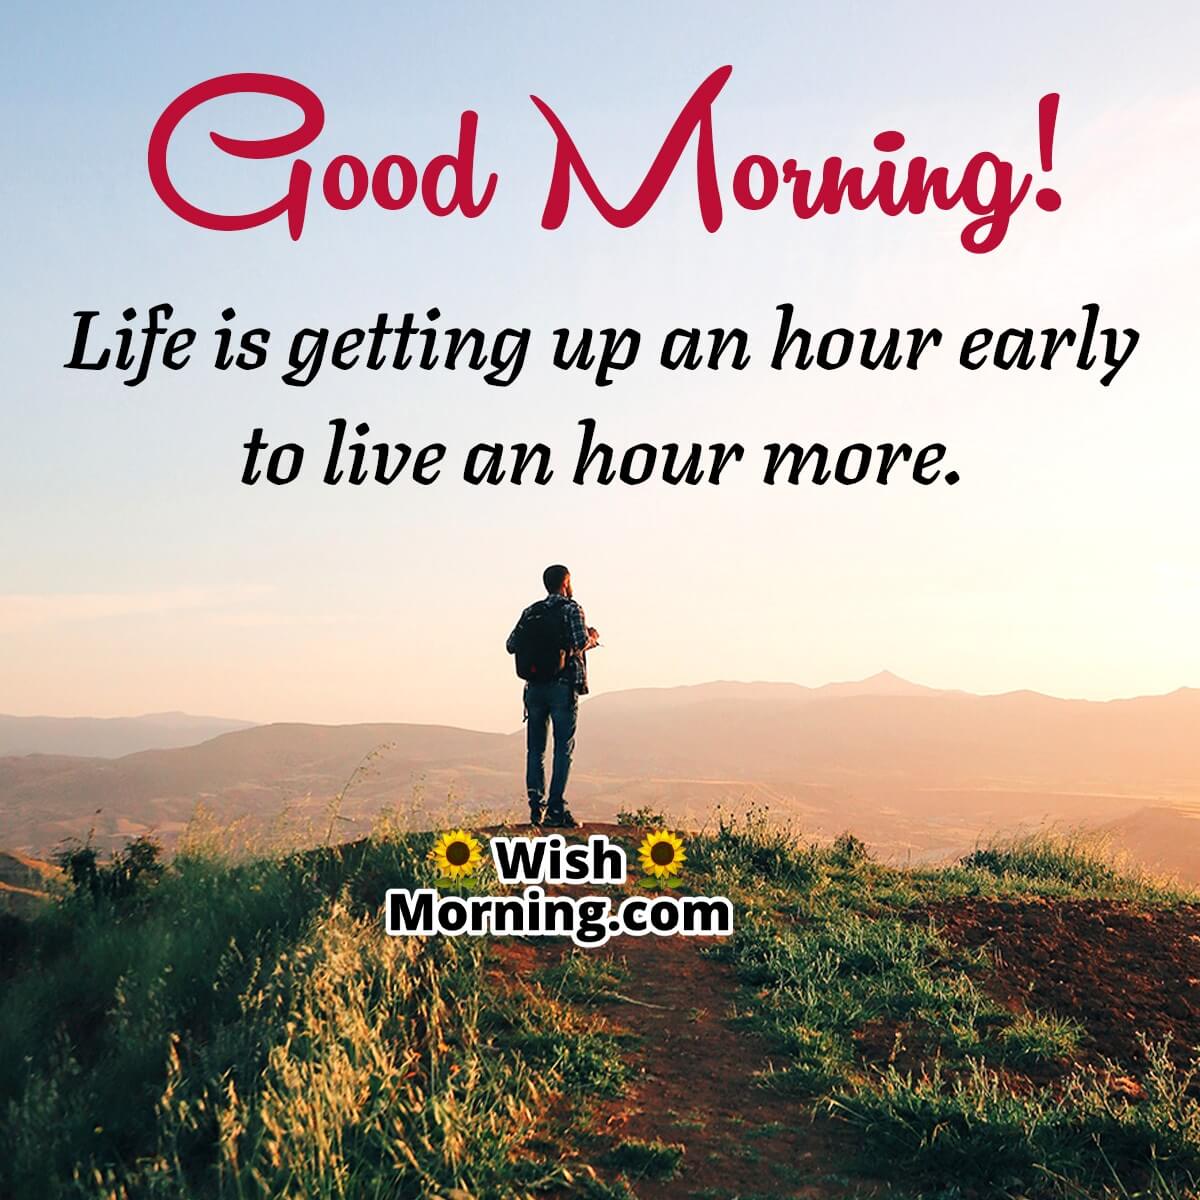 Good Morning Wishes With Advice Quotes - Jori Roxine